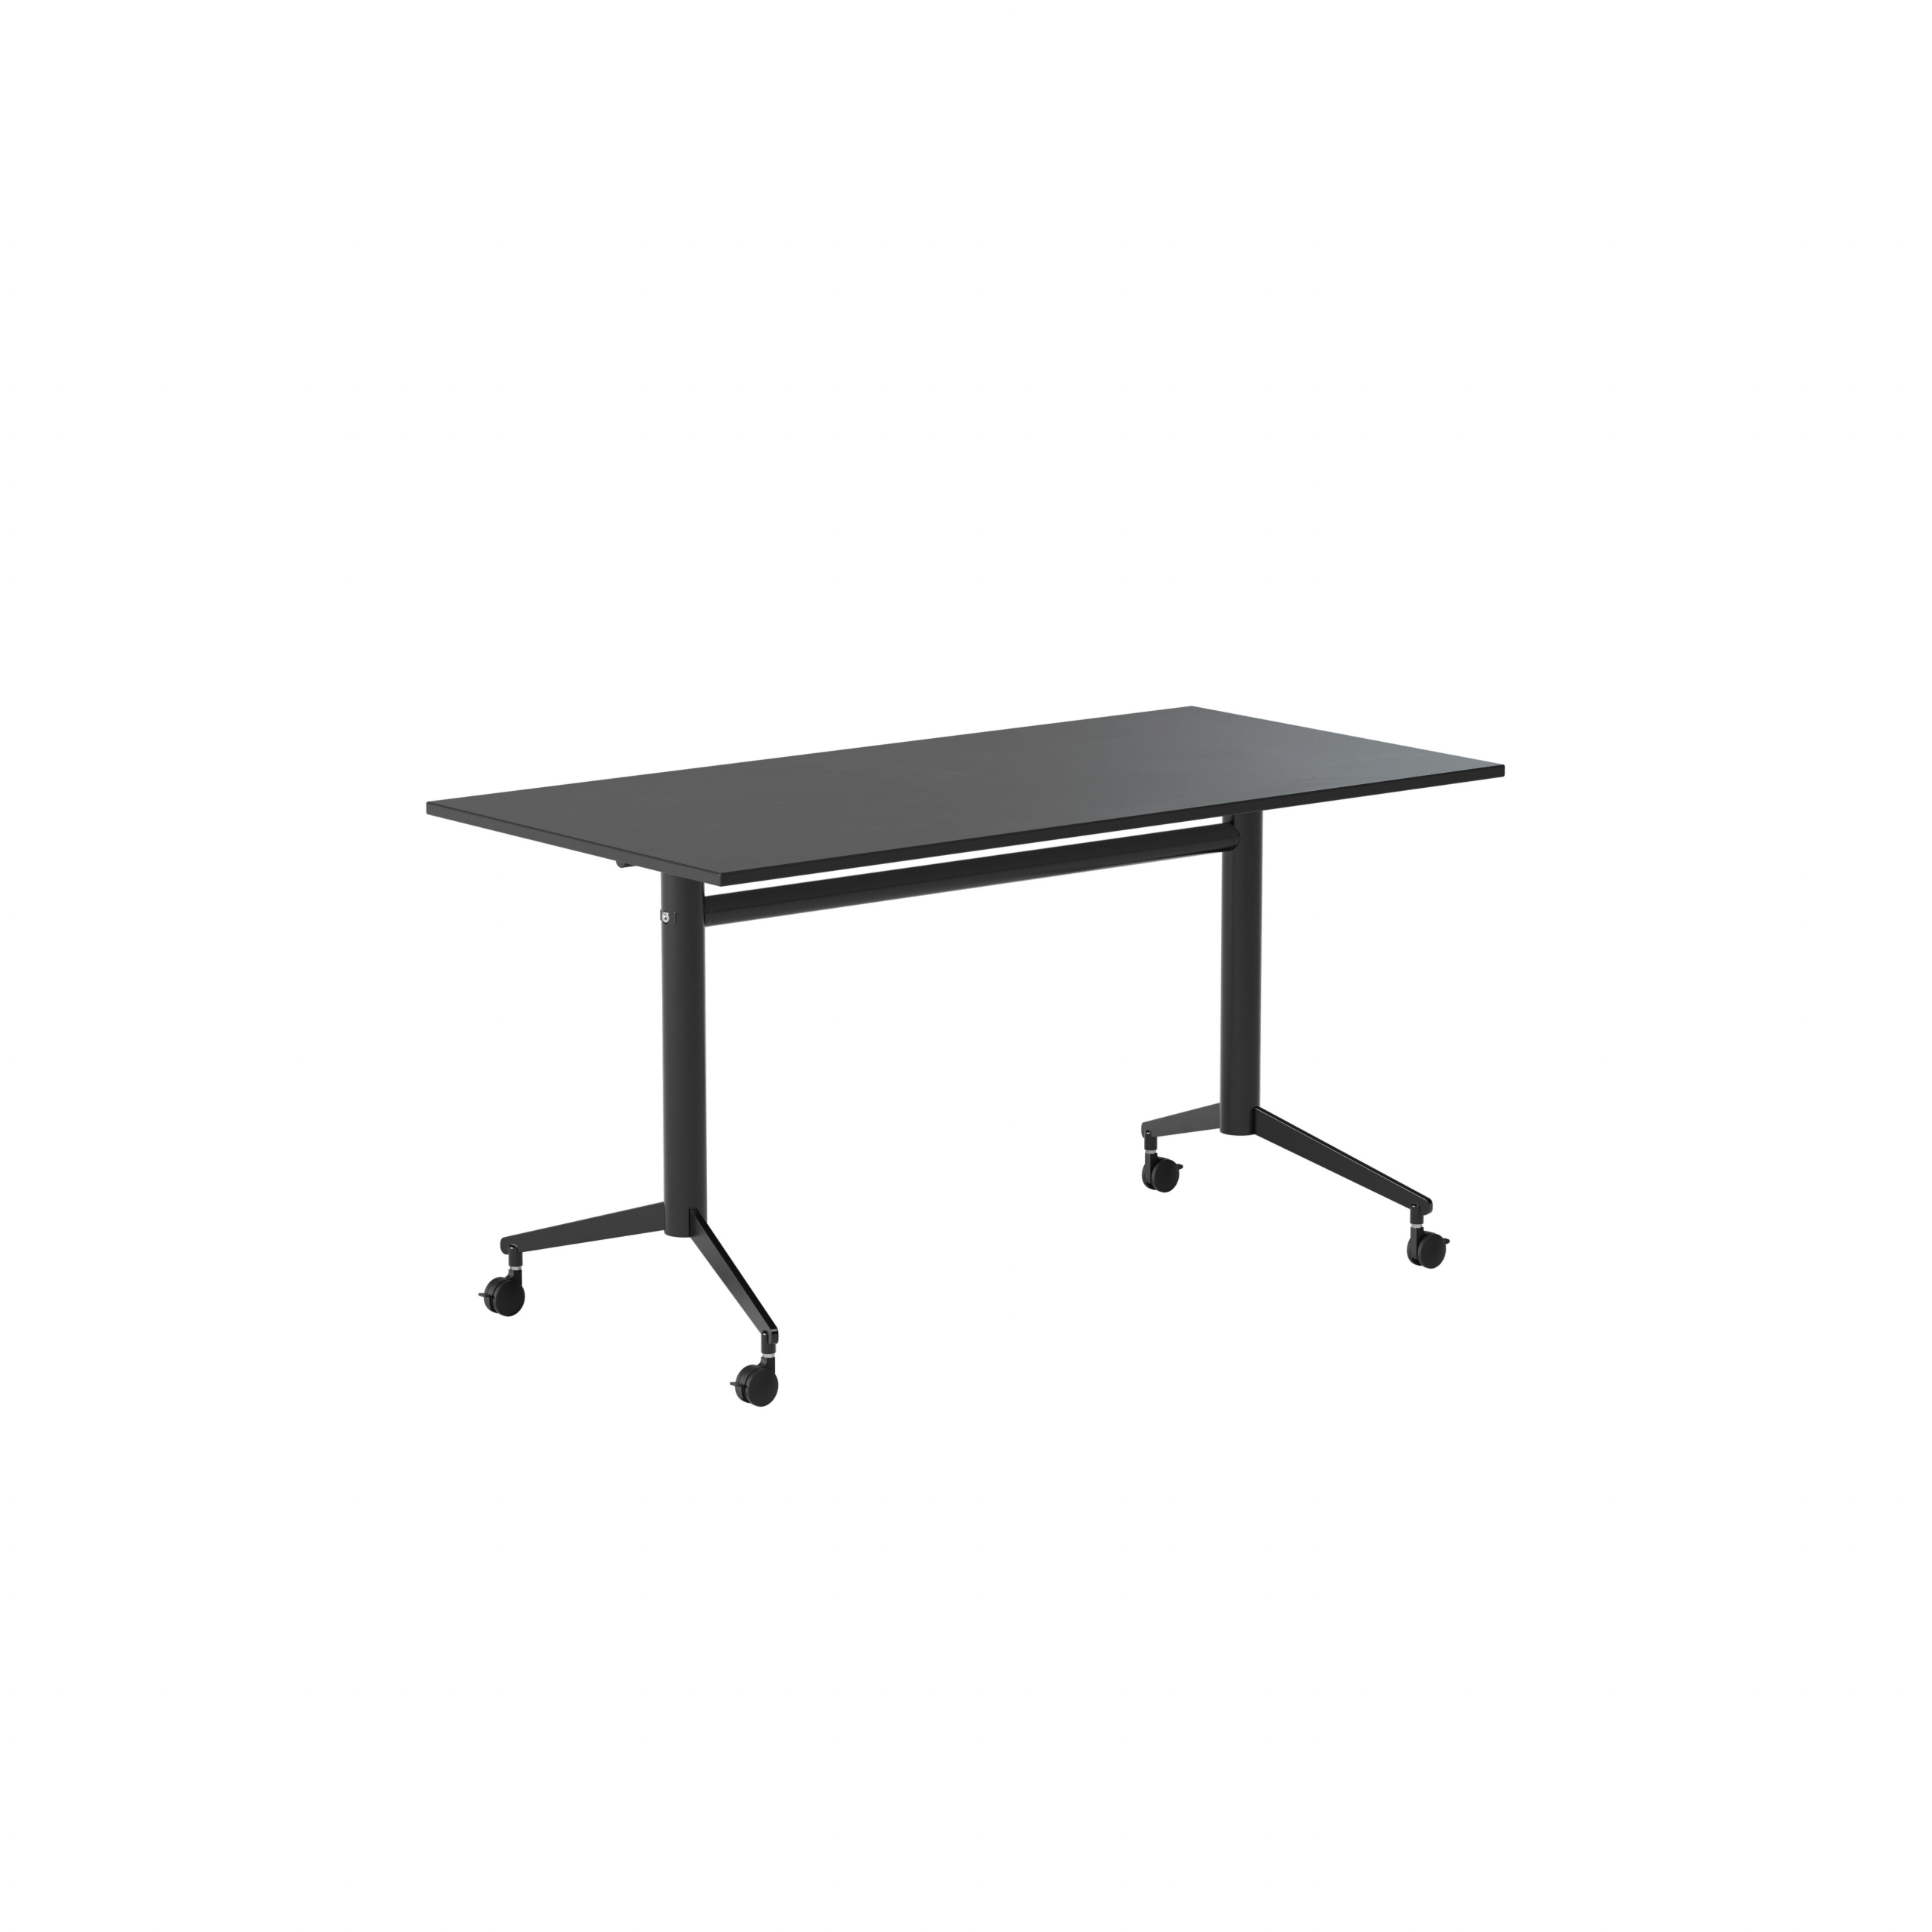 HideAway Pillar table with tiltable top, two legs